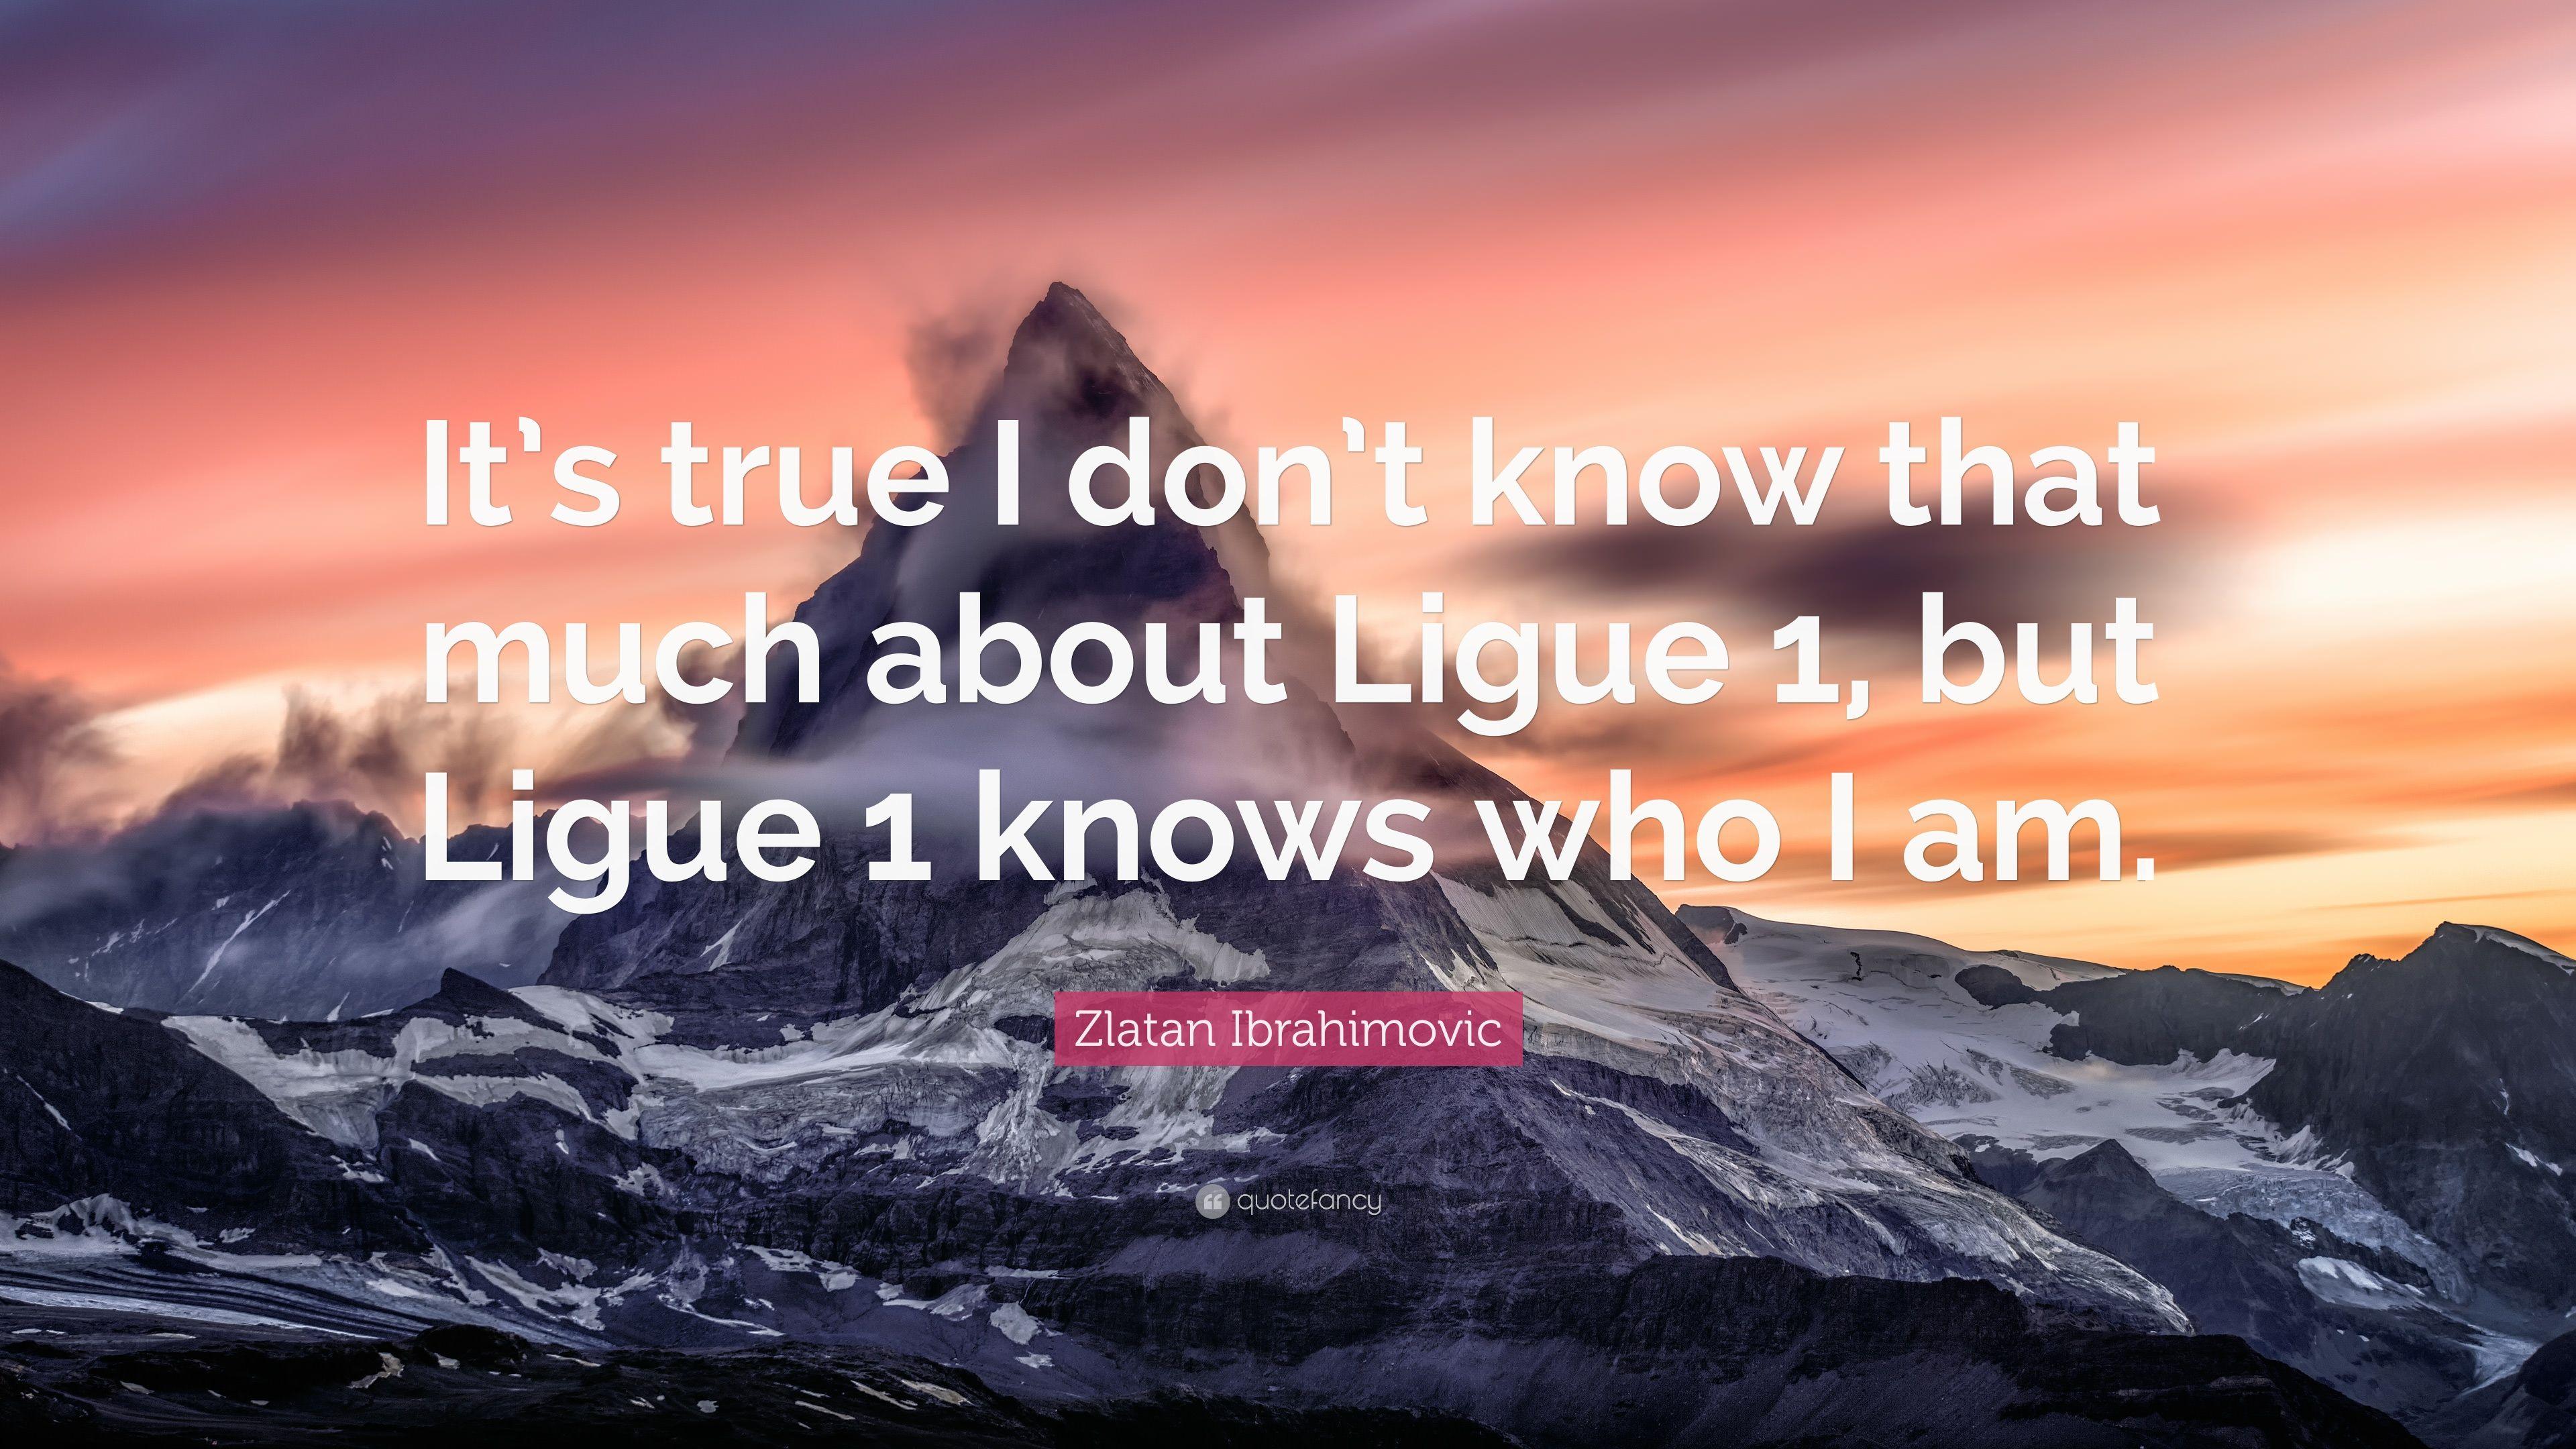 Zlatan Ibrahimovic Quote: “It's true I don't know that much about